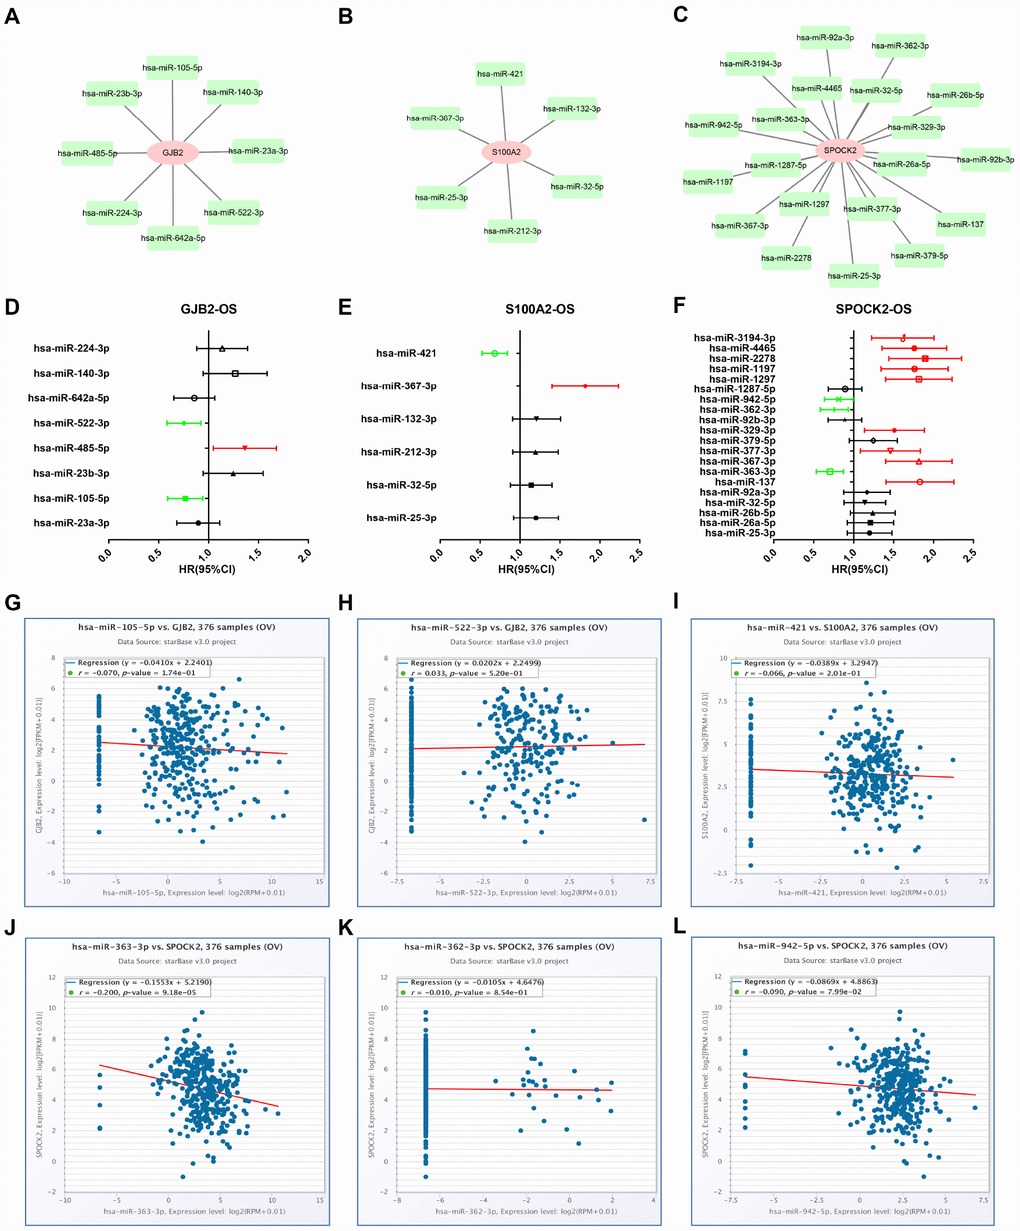 Identification of upstream potential miRNAs of GJB2, S100A2 and SPOCK2 by combination of miRNA prediction, survival analysis and correlation analysis. (A) The miRNA-GJB2 network established by Cytoscape. (B) The miRNA-S100A2 network established by Cytoscape. (C) The miRNA-SPOCK2 network established by Cytoscape. (D) Prognostic values (overall survival, OS) of potential upstream miRNAs of GJB2 in TCGA ovarian cancer cohort. (E) Prognostic values (overall survival, OS) of potential upstream miRNAs of S100A2 in TCGA ovarian cancer cohort. (F) Prognostic values (overall survival, OS) of potential upstream miRNAs of SPOCK2 in TCGA ovarian cancer cohort. Green bars indicate a favorable prognosis; red bars indicate an unfavorable prognosis; black bars represent no statistical significance. (G) The expression correlation of hsa-miR-105-5p and GJB2 in ovarian cancer. (H) The expression correlation of hsa-miR-522-3p and GJB2 in ovarian cancer. (I) The expression correlation of hsa-miR-421 and S100A2 in ovarian cancer. (J) The expression correlation of hsa-miR-363-3p and SPOCK2 in ovarian cancer. (K) The expression correlation of hsa-miR-362-3p and SPOCK2 in ovarian cancer. (L) The expression correlation of hsa-miR-942-5p and SPOCK2 in ovarian cancer.